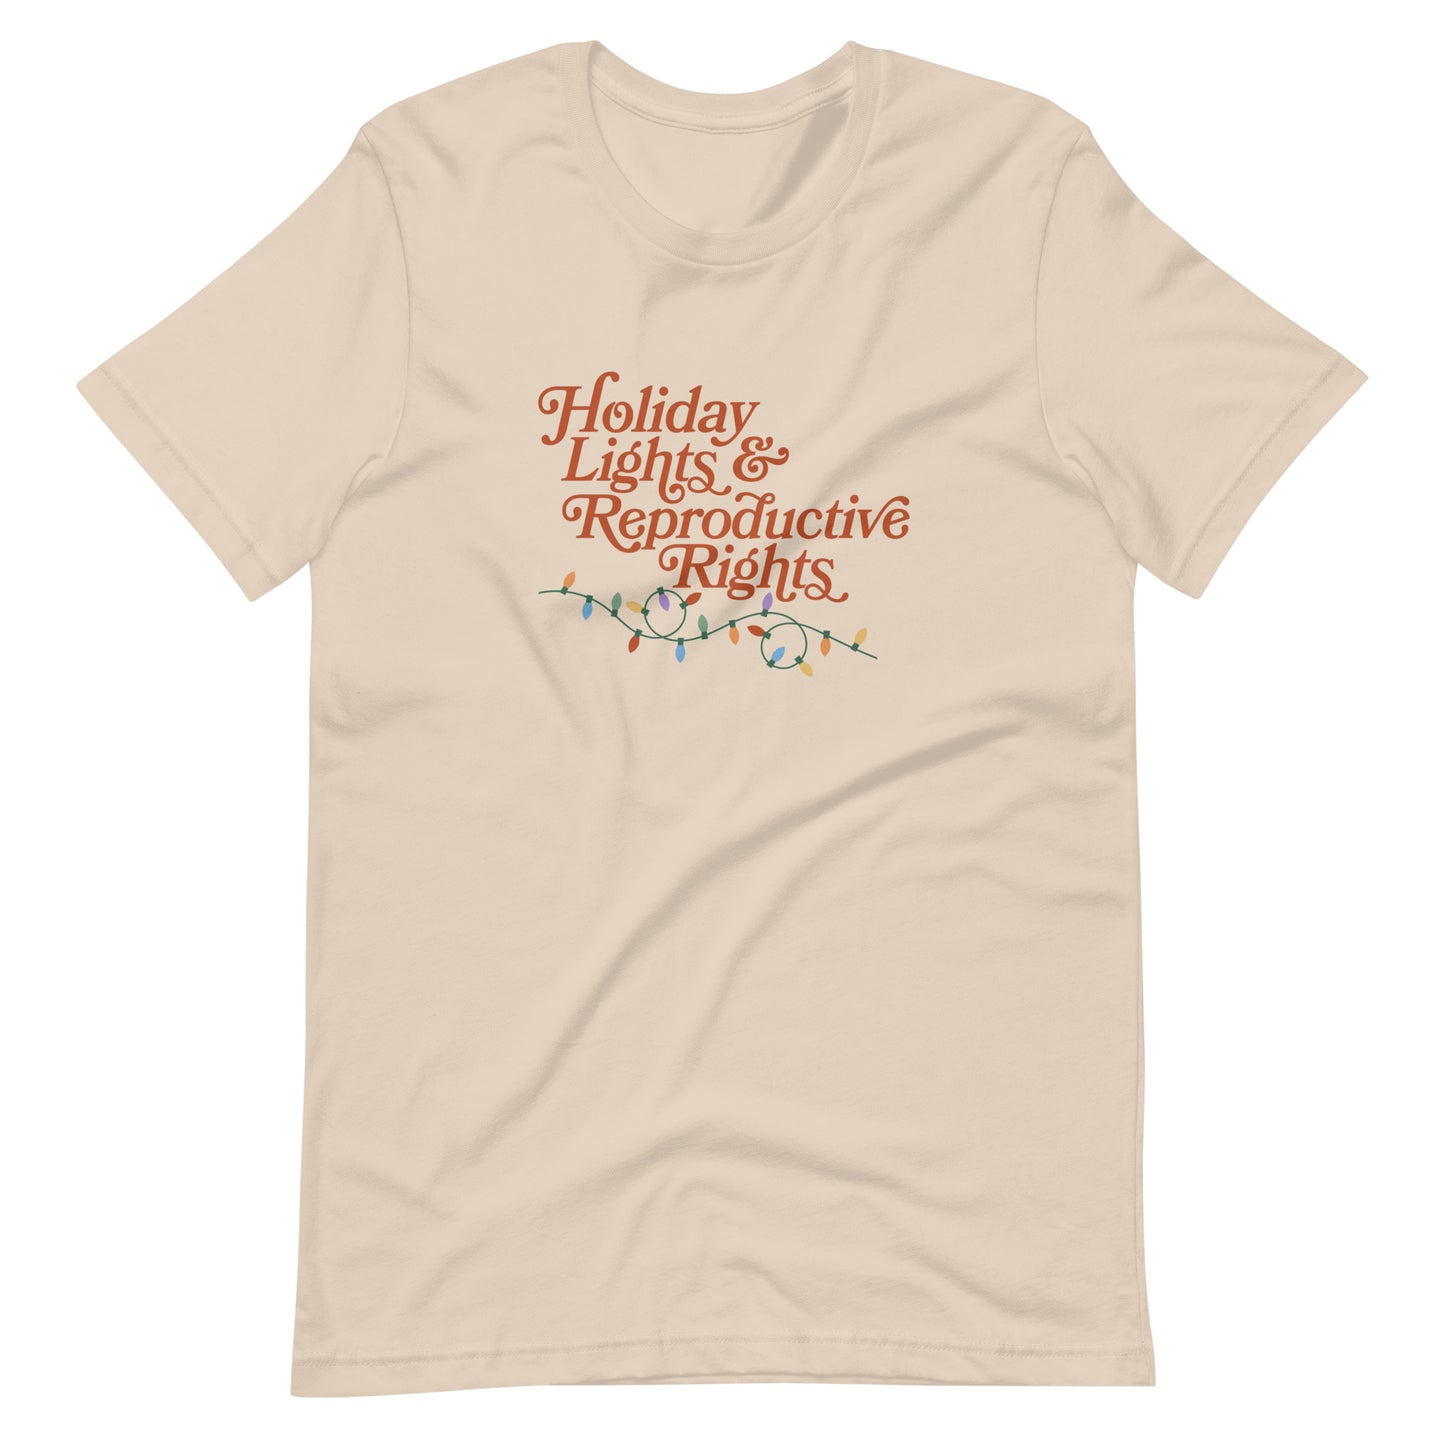 Holiday Lights & Reproductive Rights Unisex Tee